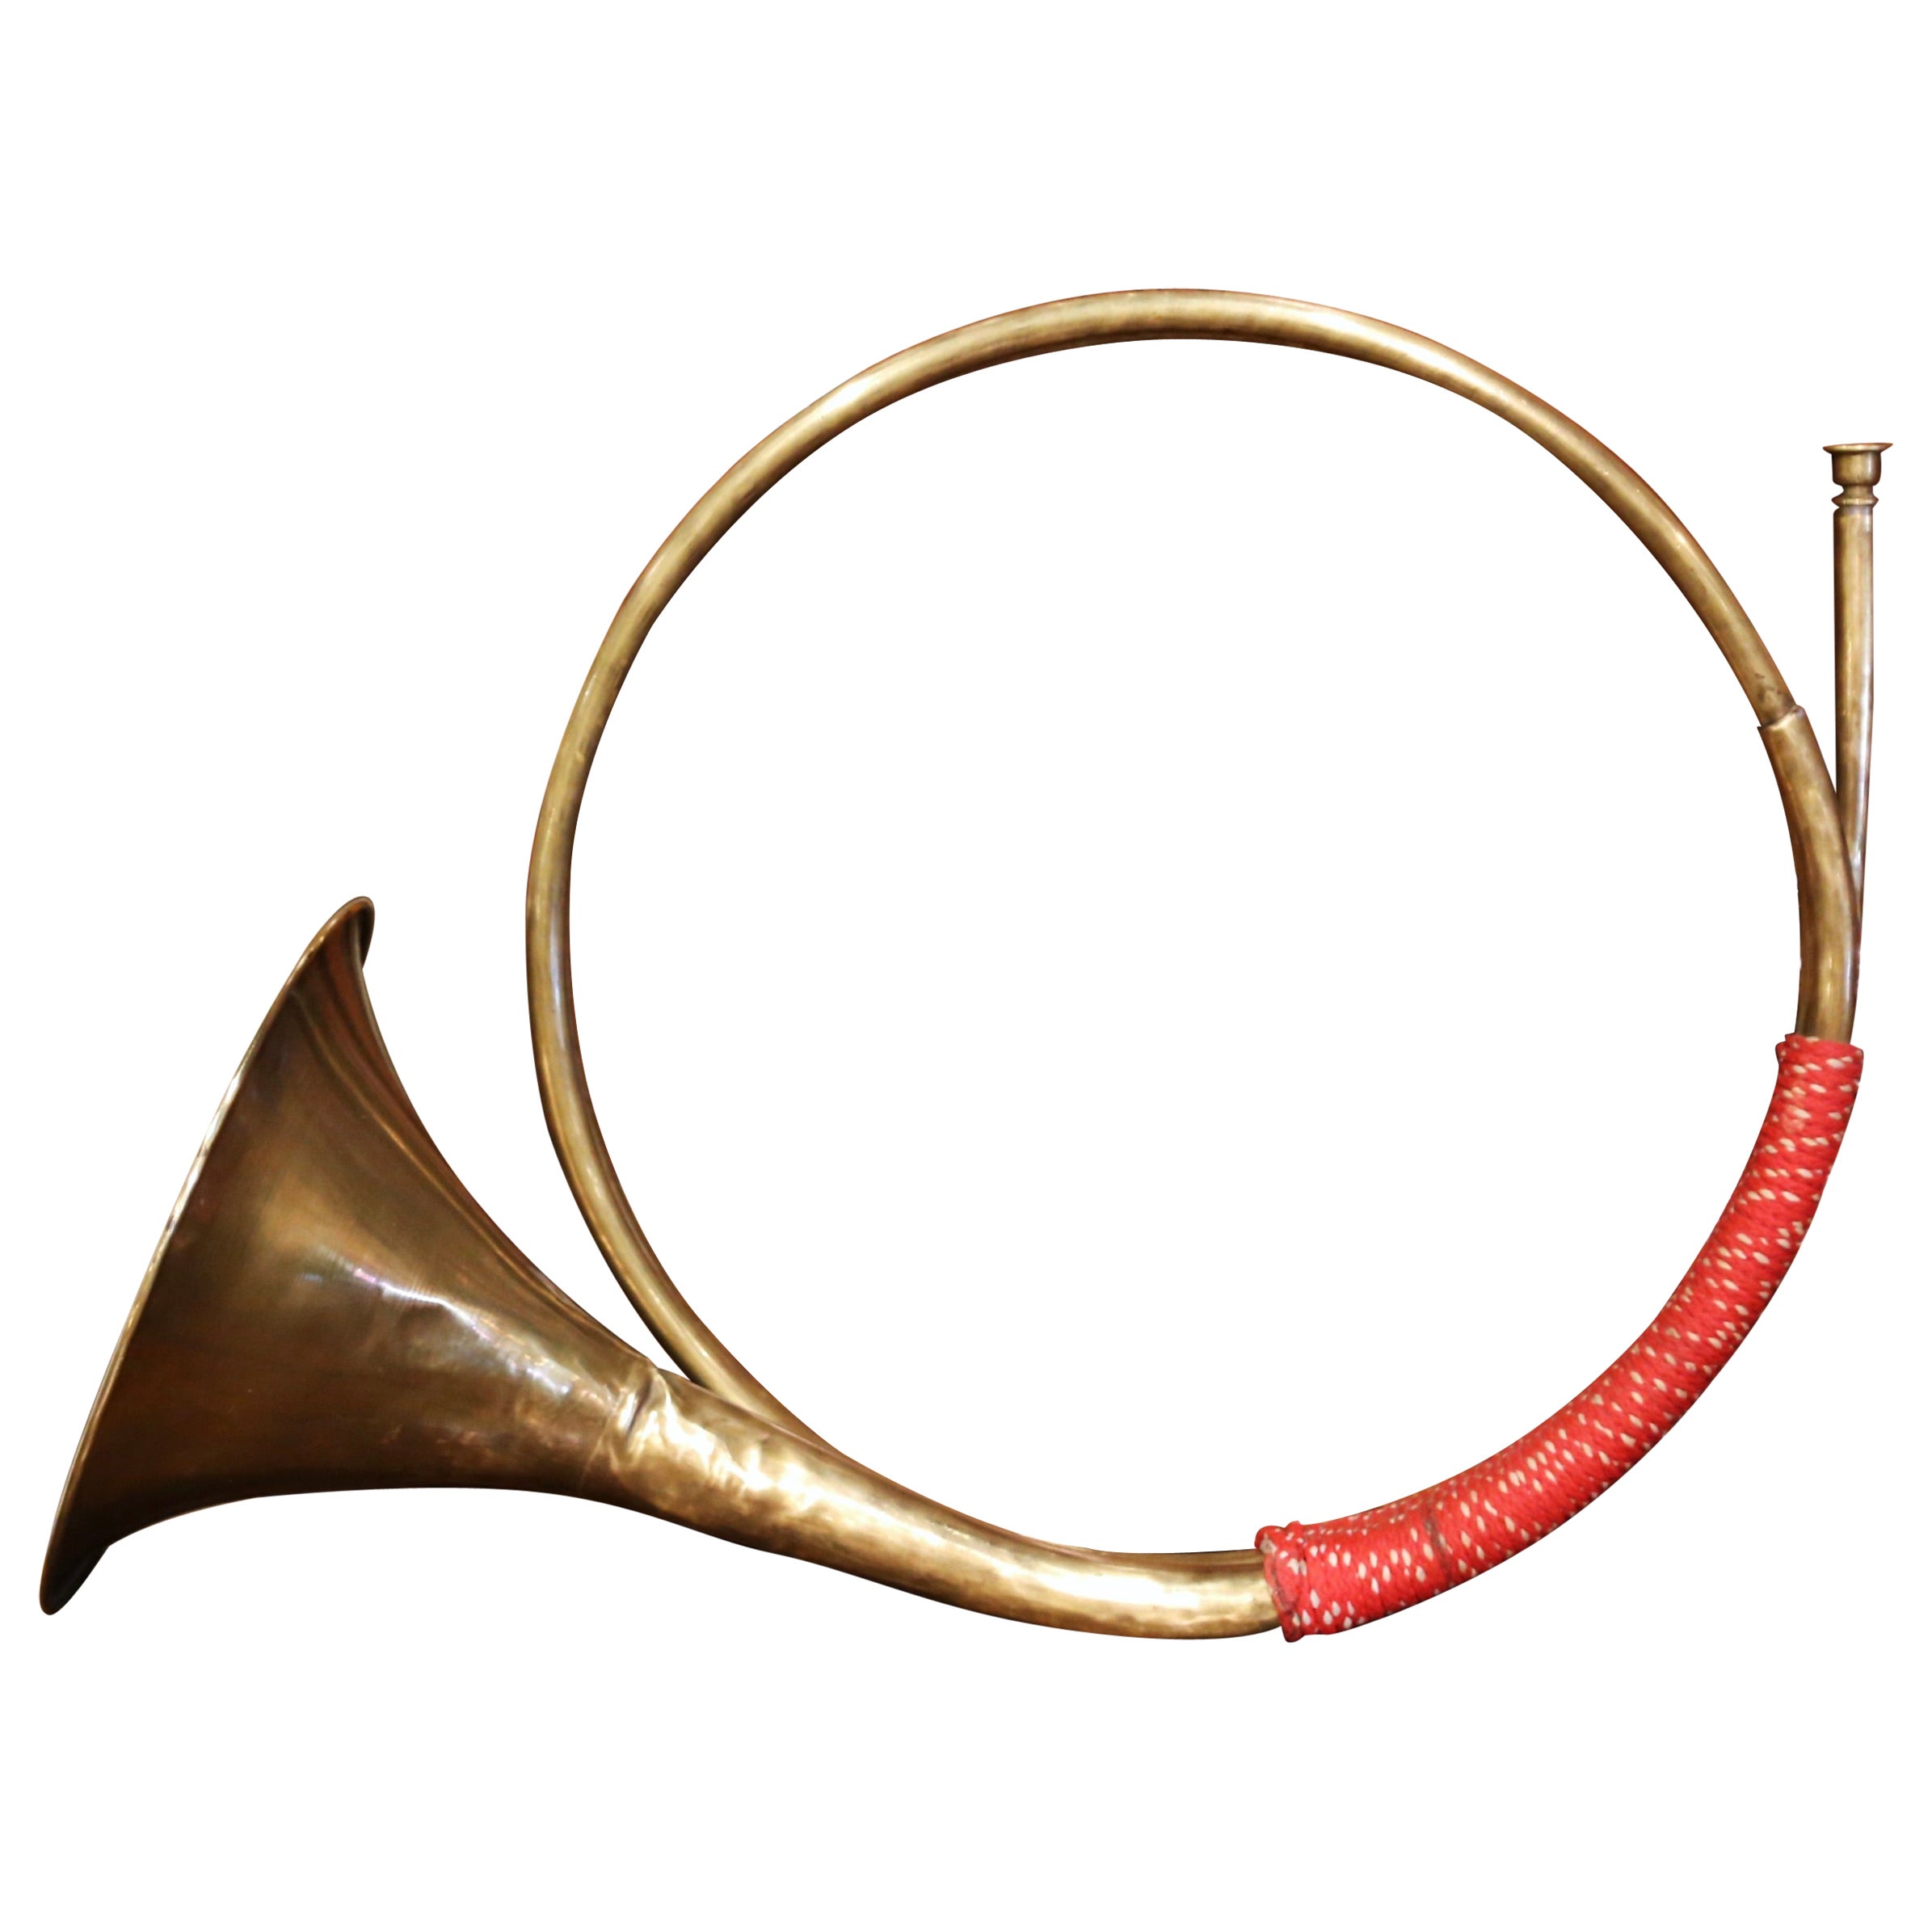 Early 20th Century French Brass "Cor de Chasse" Hunting Horn For Sale